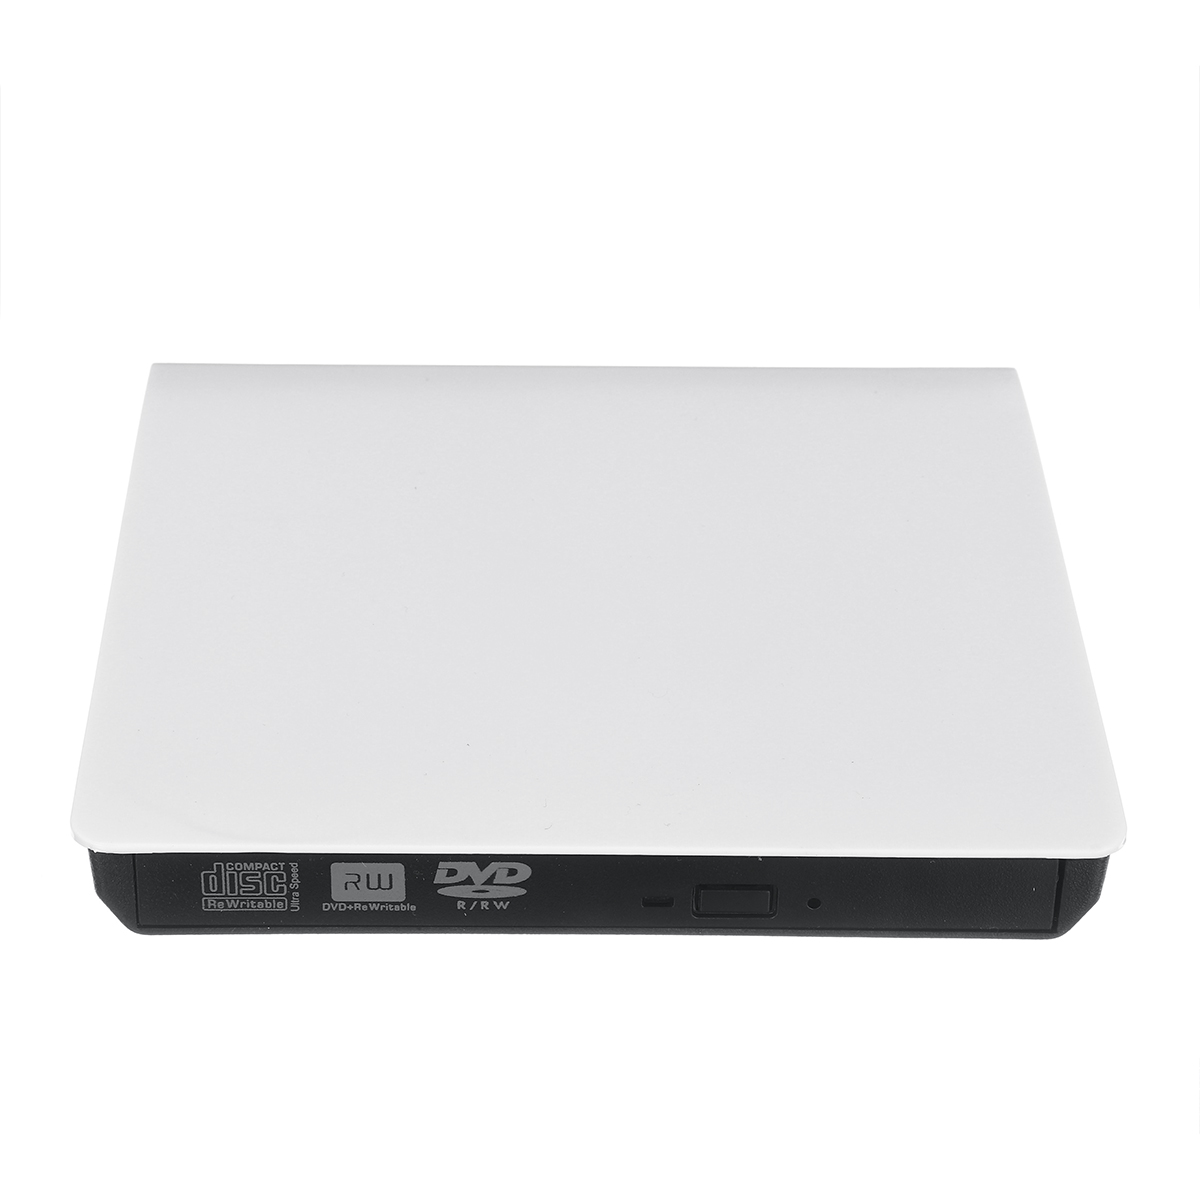 Find USB3.0 External Optical Drive USB CD DVD Burner DVD-RW Player Writer Rewriter Support 2MB Data Transfer for PC Laptop Compute for Sale on Gipsybee.com with cryptocurrencies